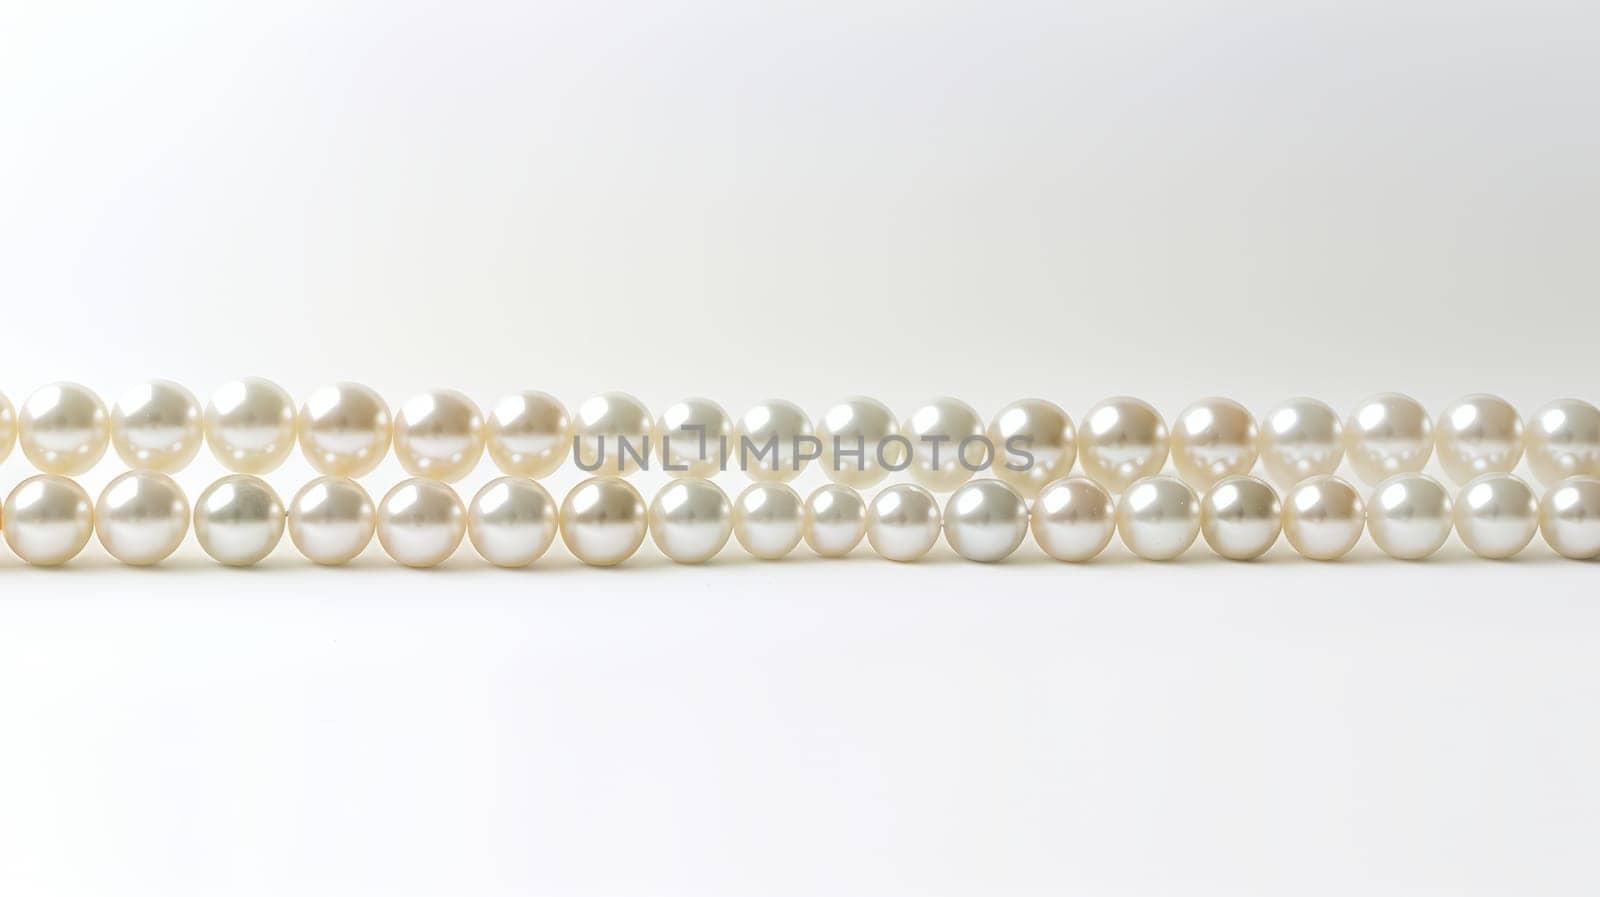 String of pearls on white background. White and round pearls with iridescence. Pearls decrease in size towards the ends. Perfect for themes of elegance, luxury and beauty. High quality photo